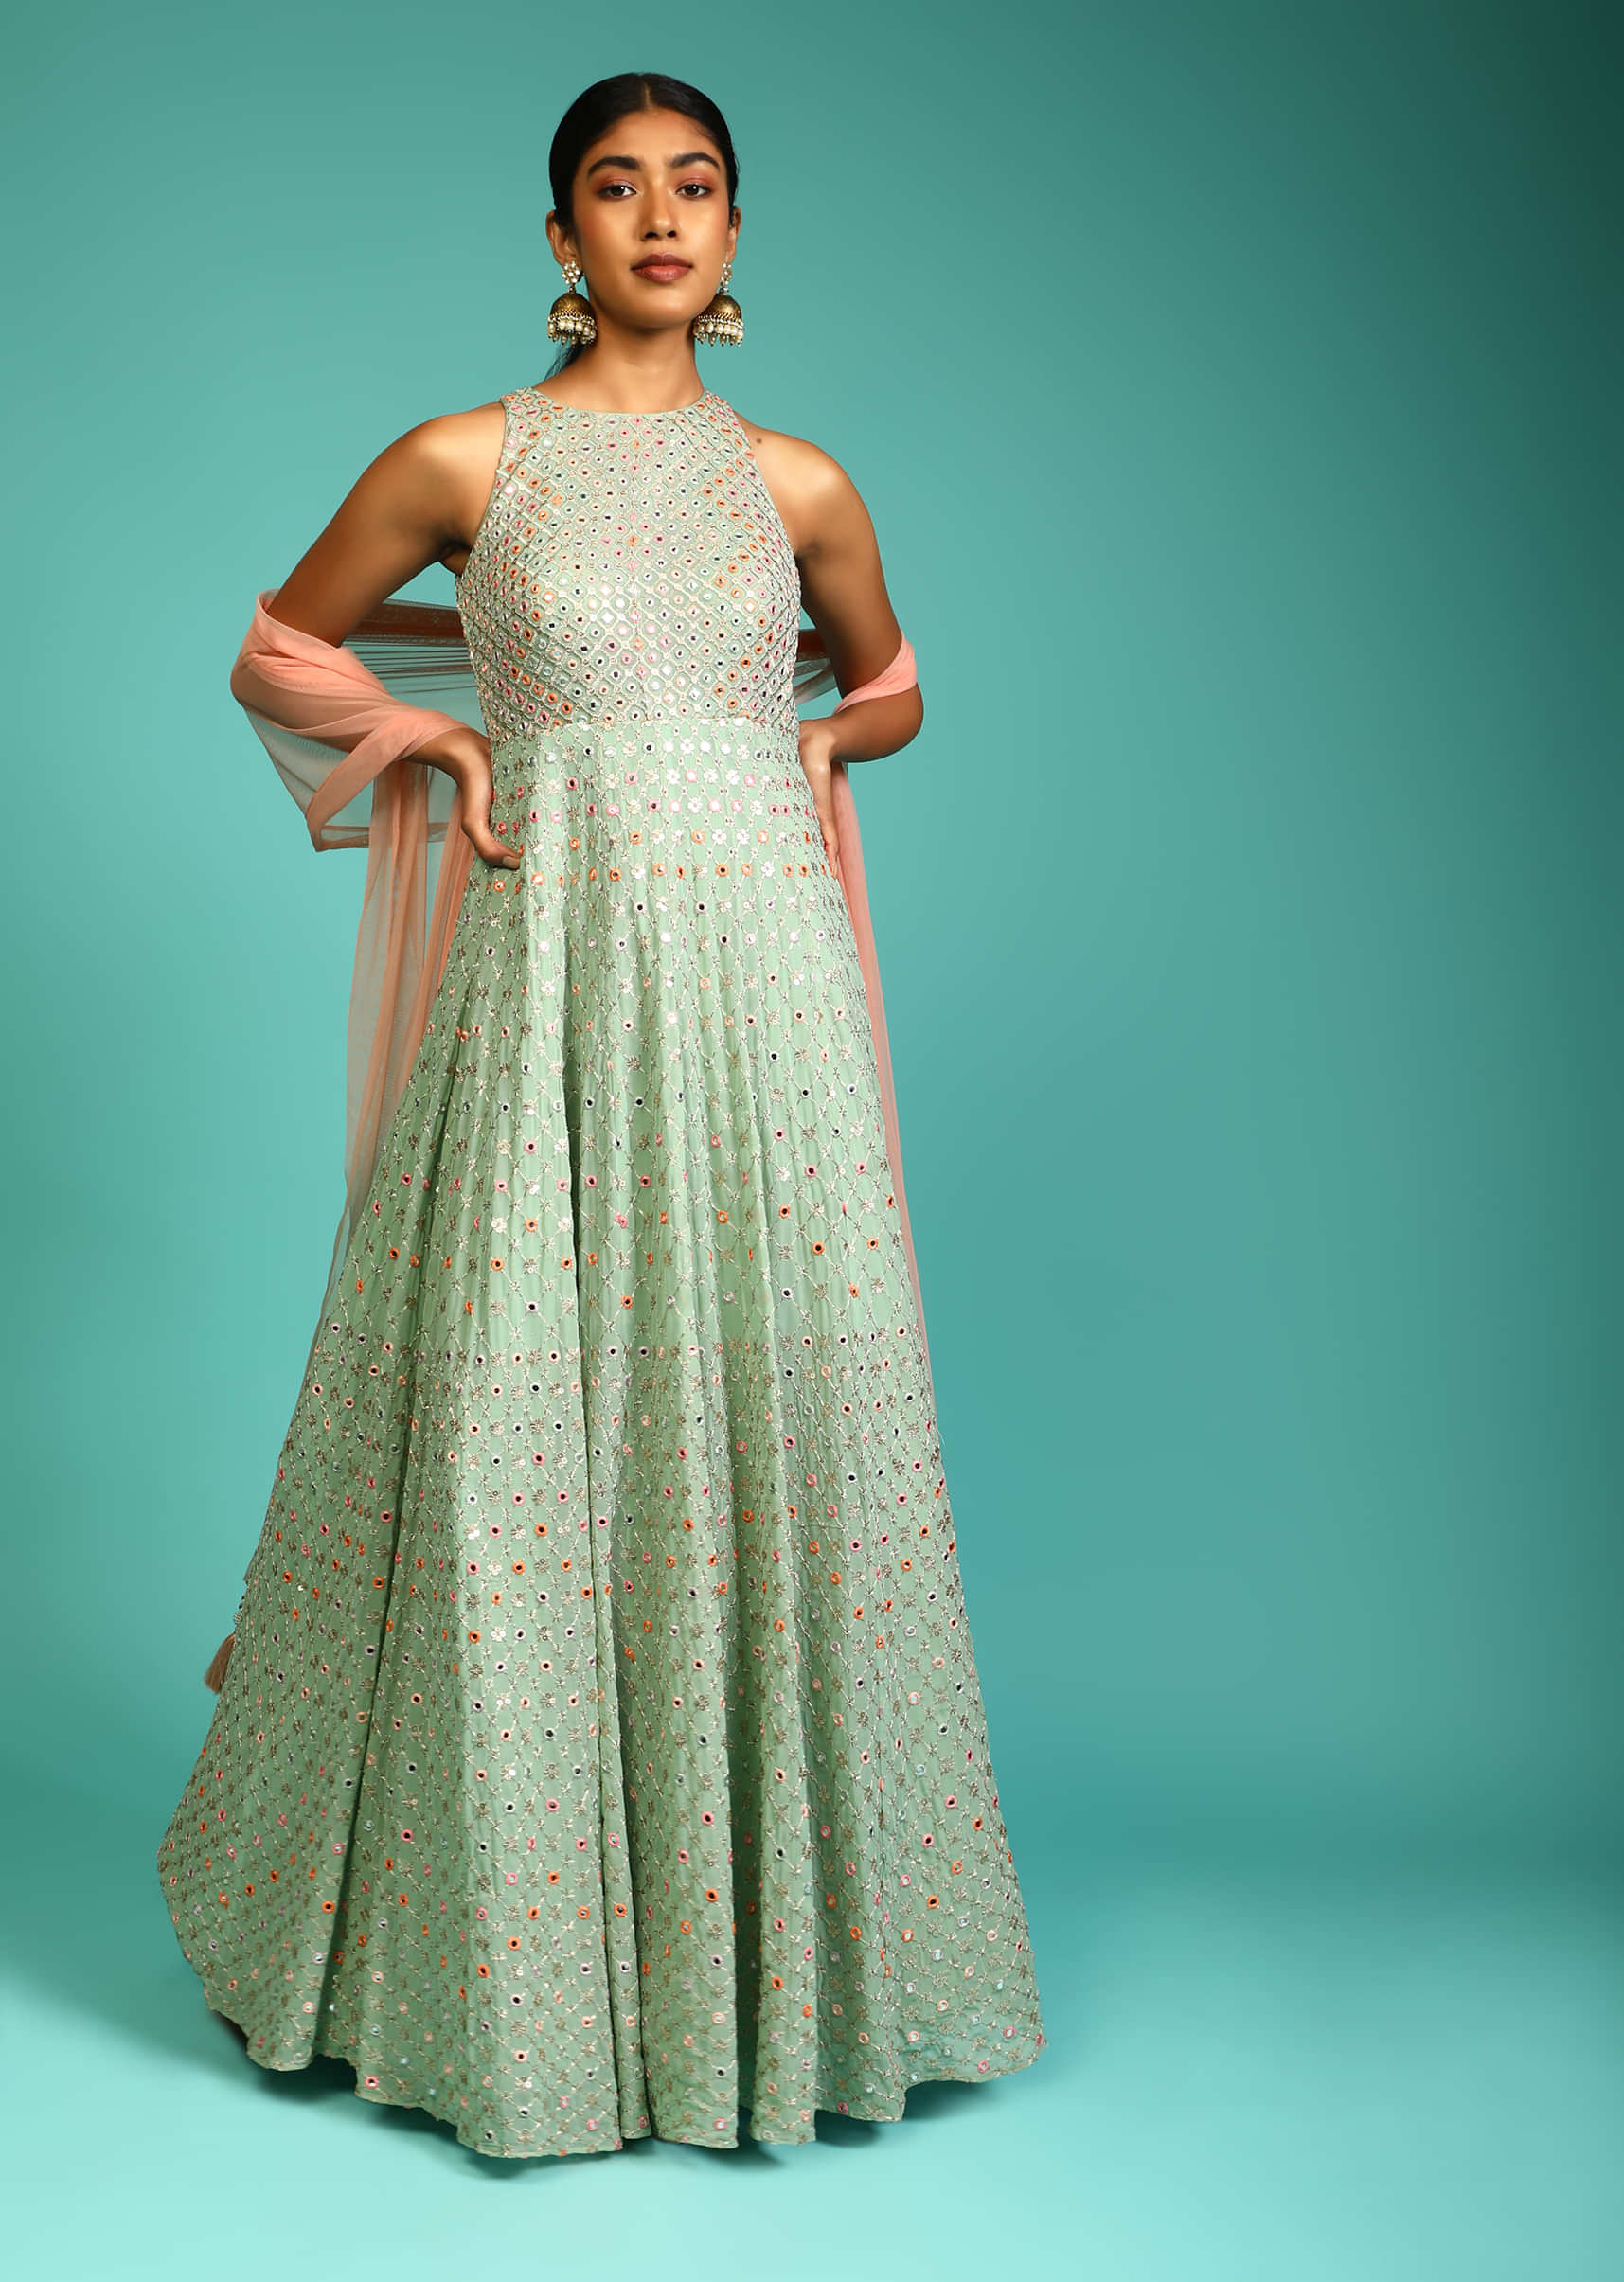 Opaline Green Anarkali Suit In Georgette With Halter Neckline And Multi Colored Resham And Mirror Embroidery All Over